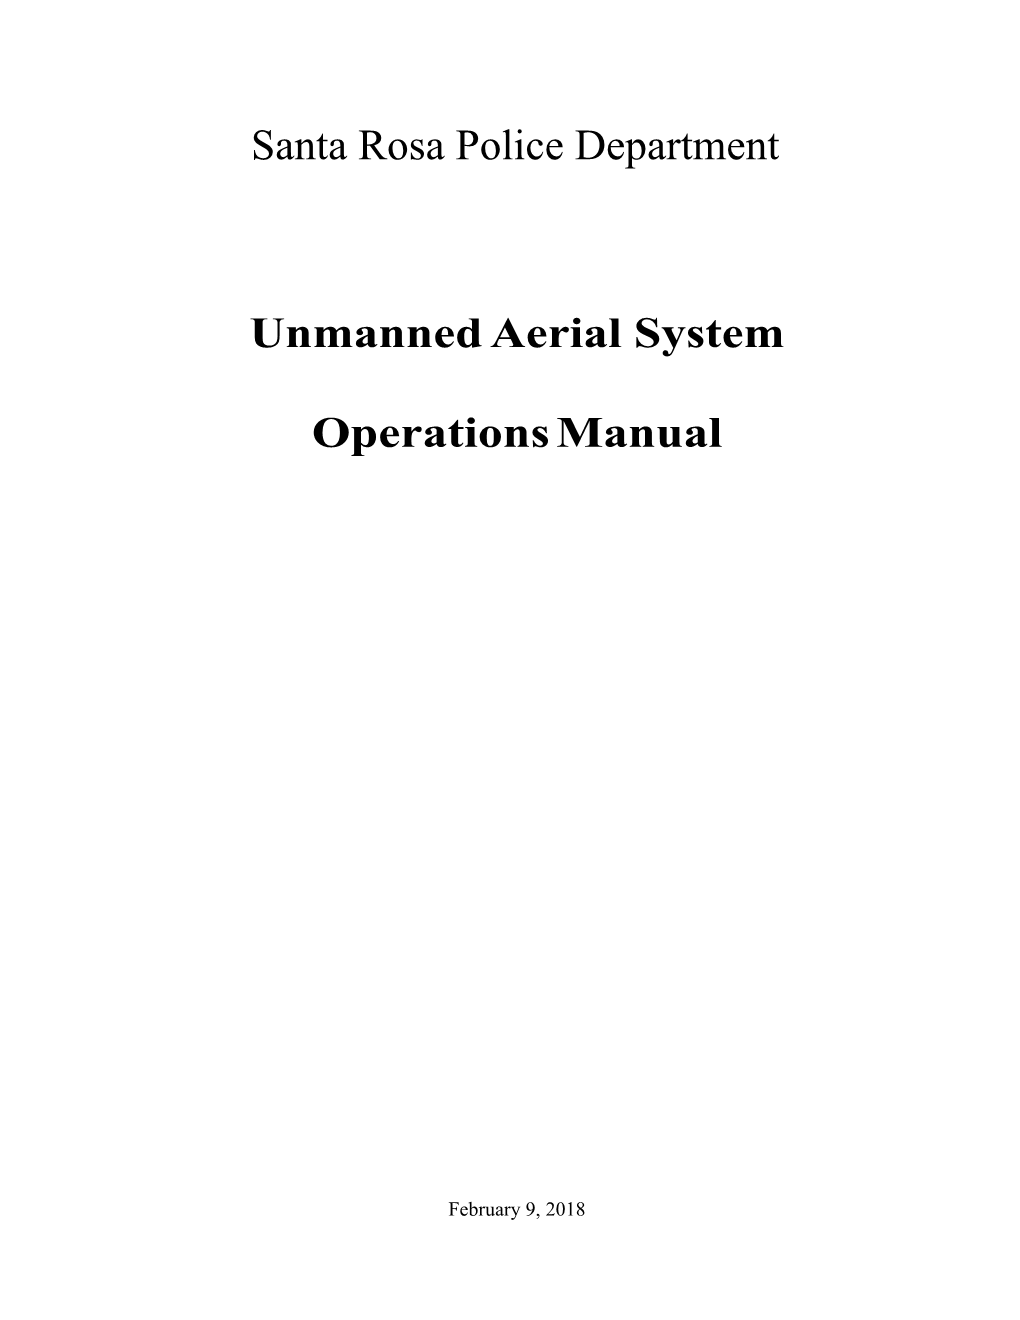 SRPD Unmanned Aerial System Operations Manual